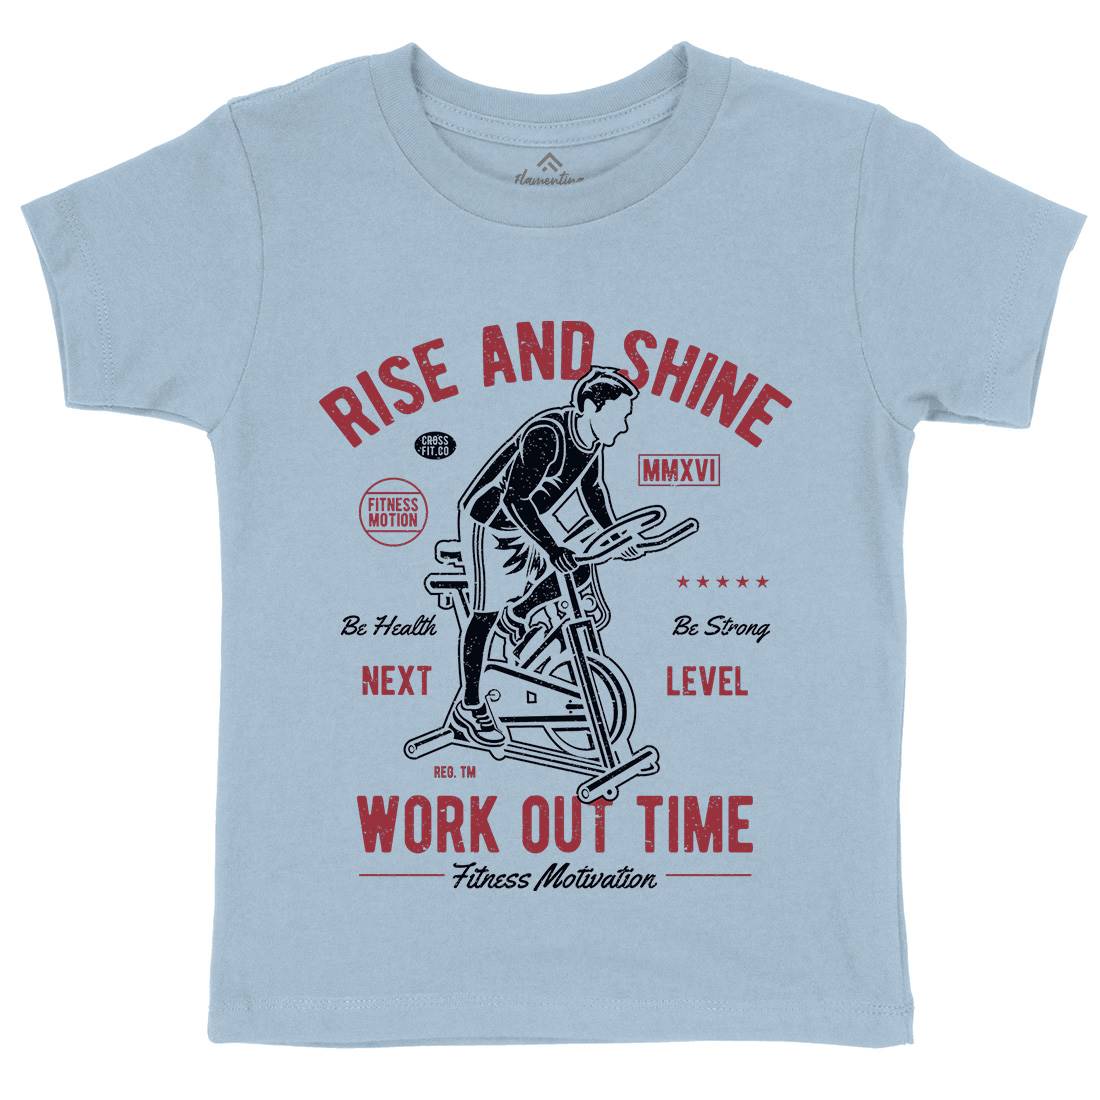 Work Out Time Kids Organic Crew Neck T-Shirt Gym A199